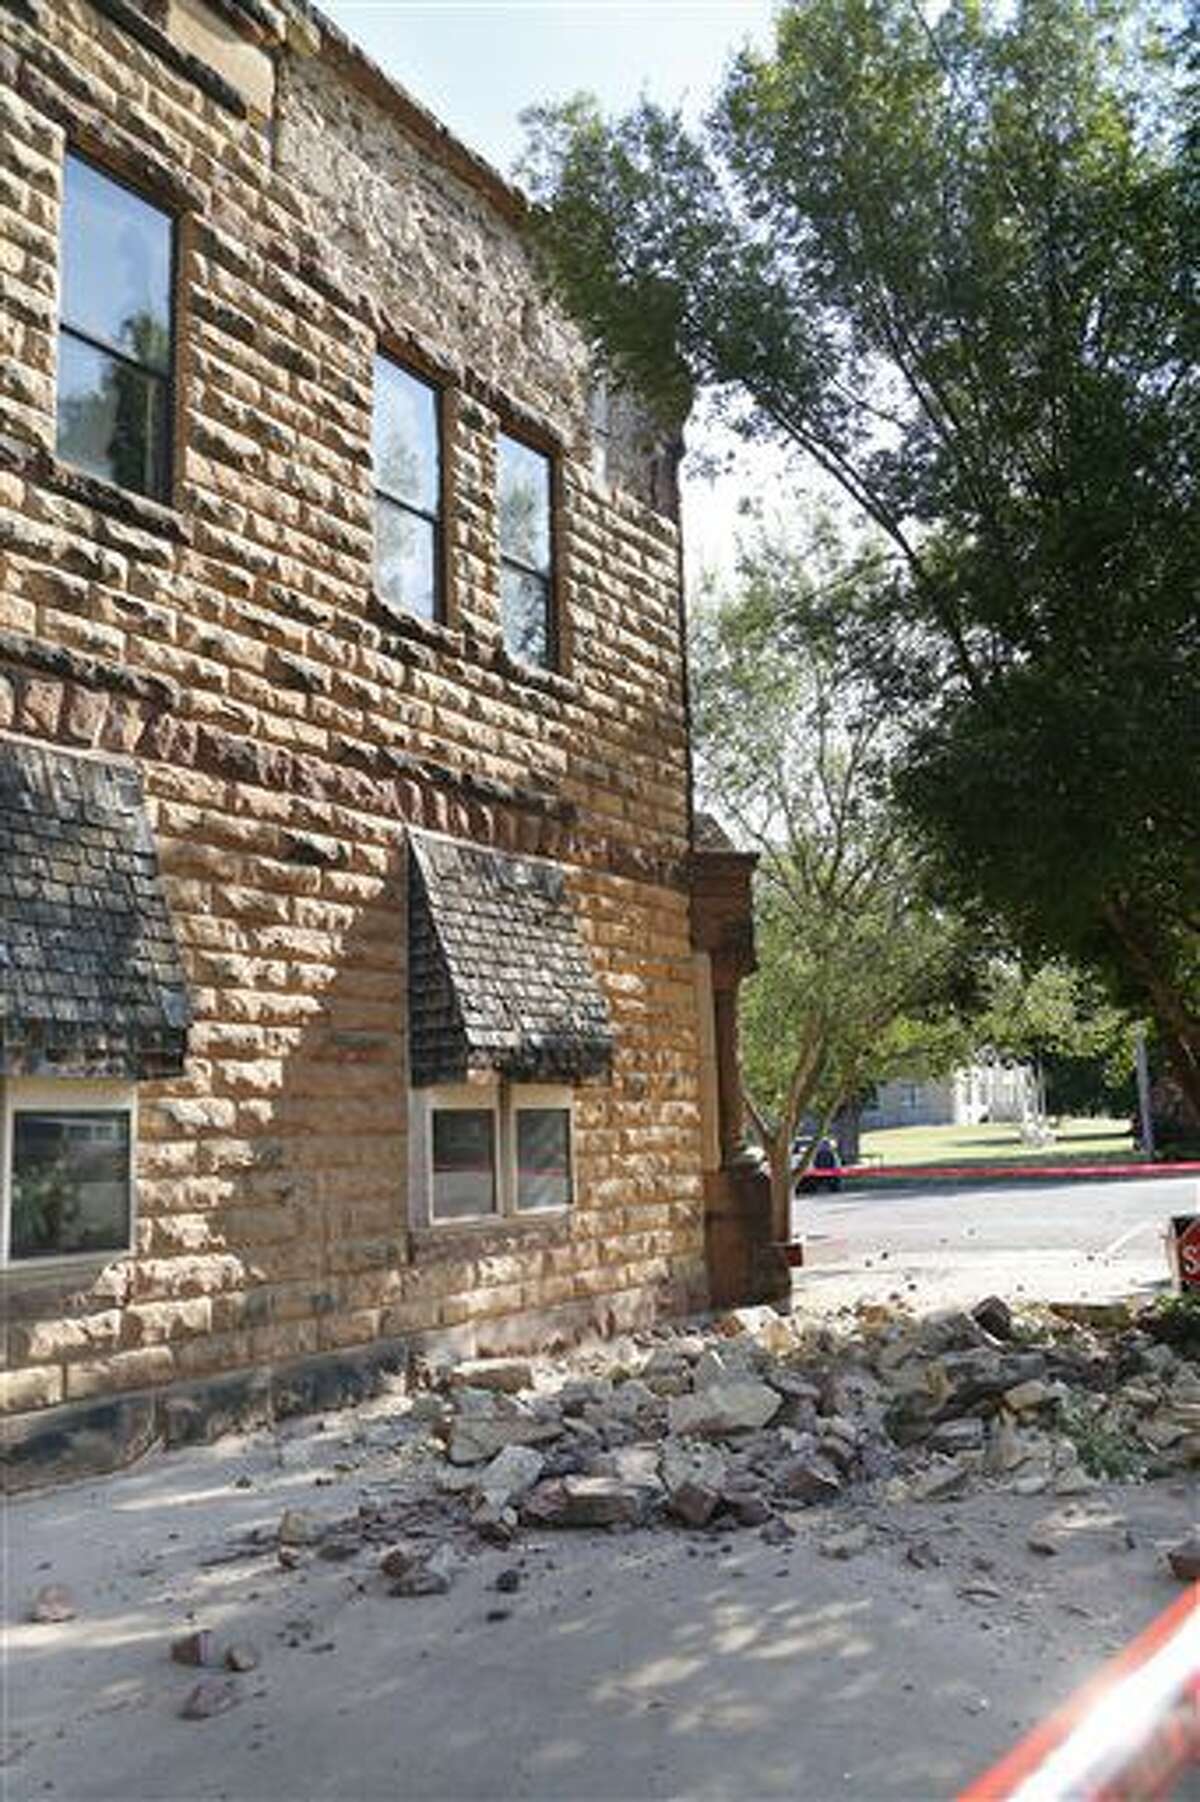 Sandstone bricks from the side of the historic Pawnee County Bank litter the sidewalk after an early morning earthquake in Pawnee, Oka., on Saturday, Sept. 3, 2016. The United States Geological Survey said a 5.6 magnitude earthquake happened Saturday morning in north-central Oklahoma, on the fringe of an area where regulators had stepped in to limit wastewater disposal. That temblor matches a November 2011 quake in the same region. (Paul Hellstern/The Oklahoman via AP)